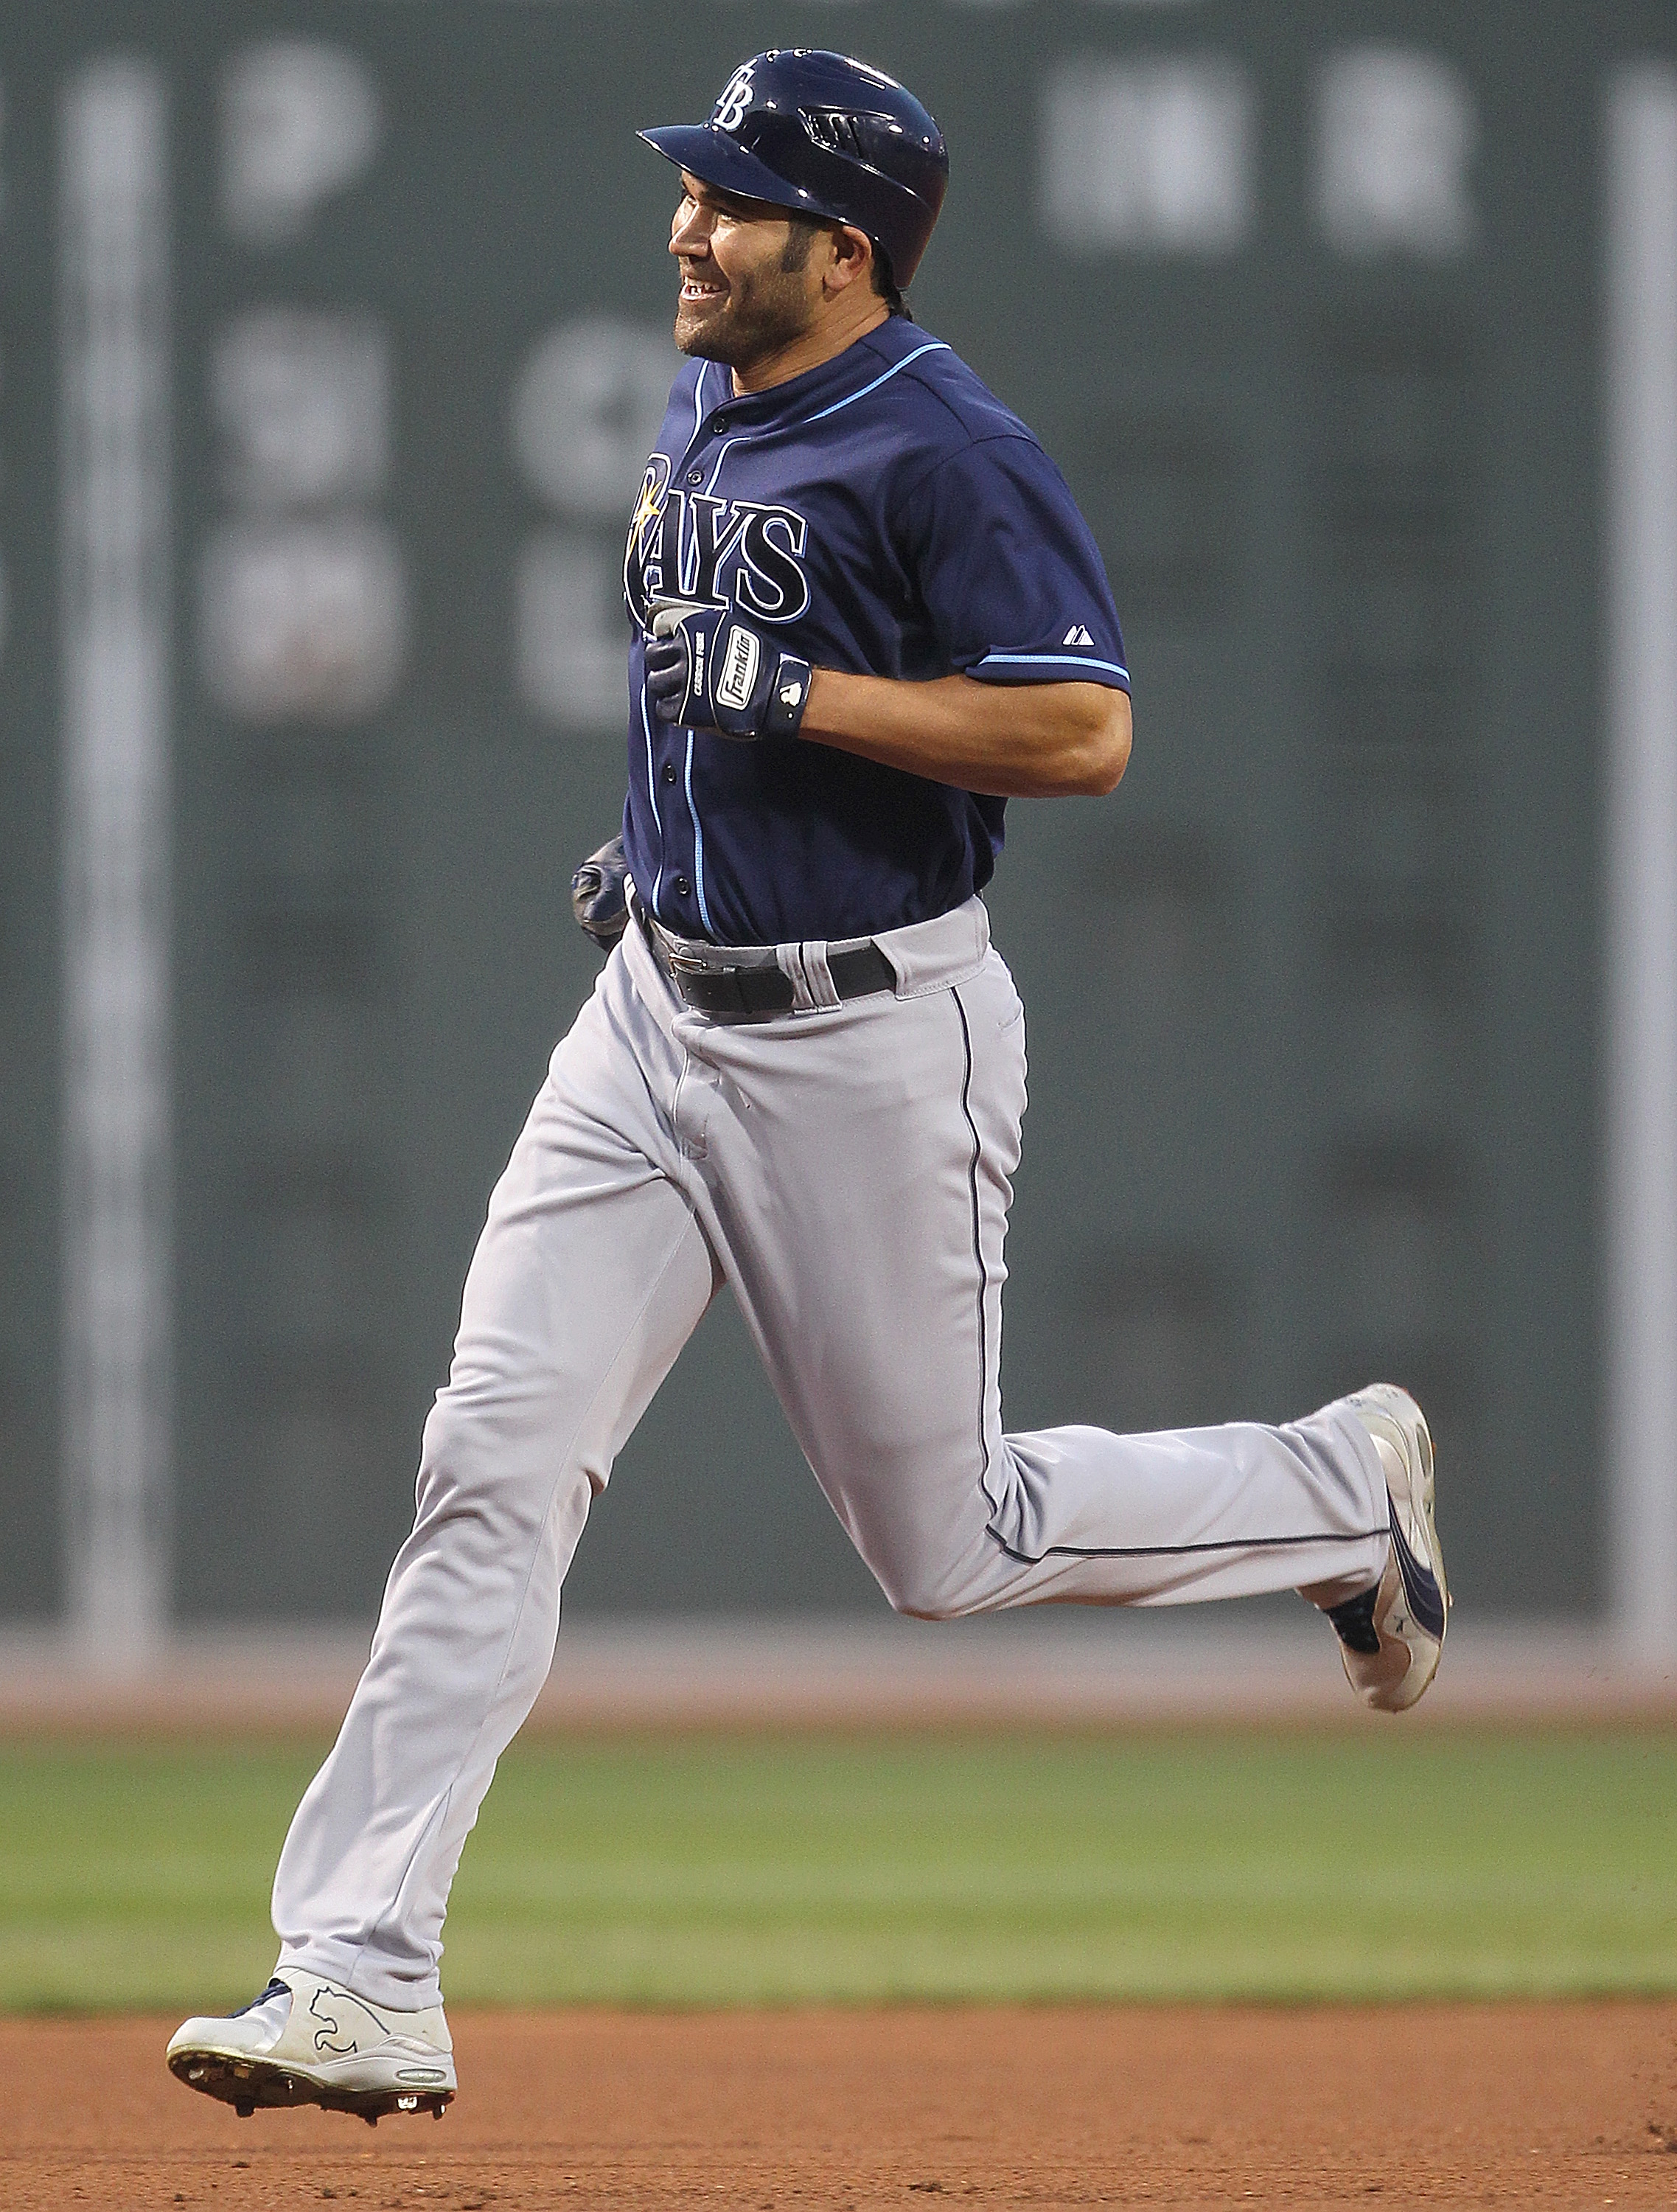 BOSTON, MA - APRIL 11:  Johnny Damon #22 of the Tampa Bay Rays rounds the bases after hitting a home run in the first inning against the Boston Red Sox at Fenway Park April 11, 2011 in Boston, Massachusetts. (Photo by Jim Rogash/Getty Images)